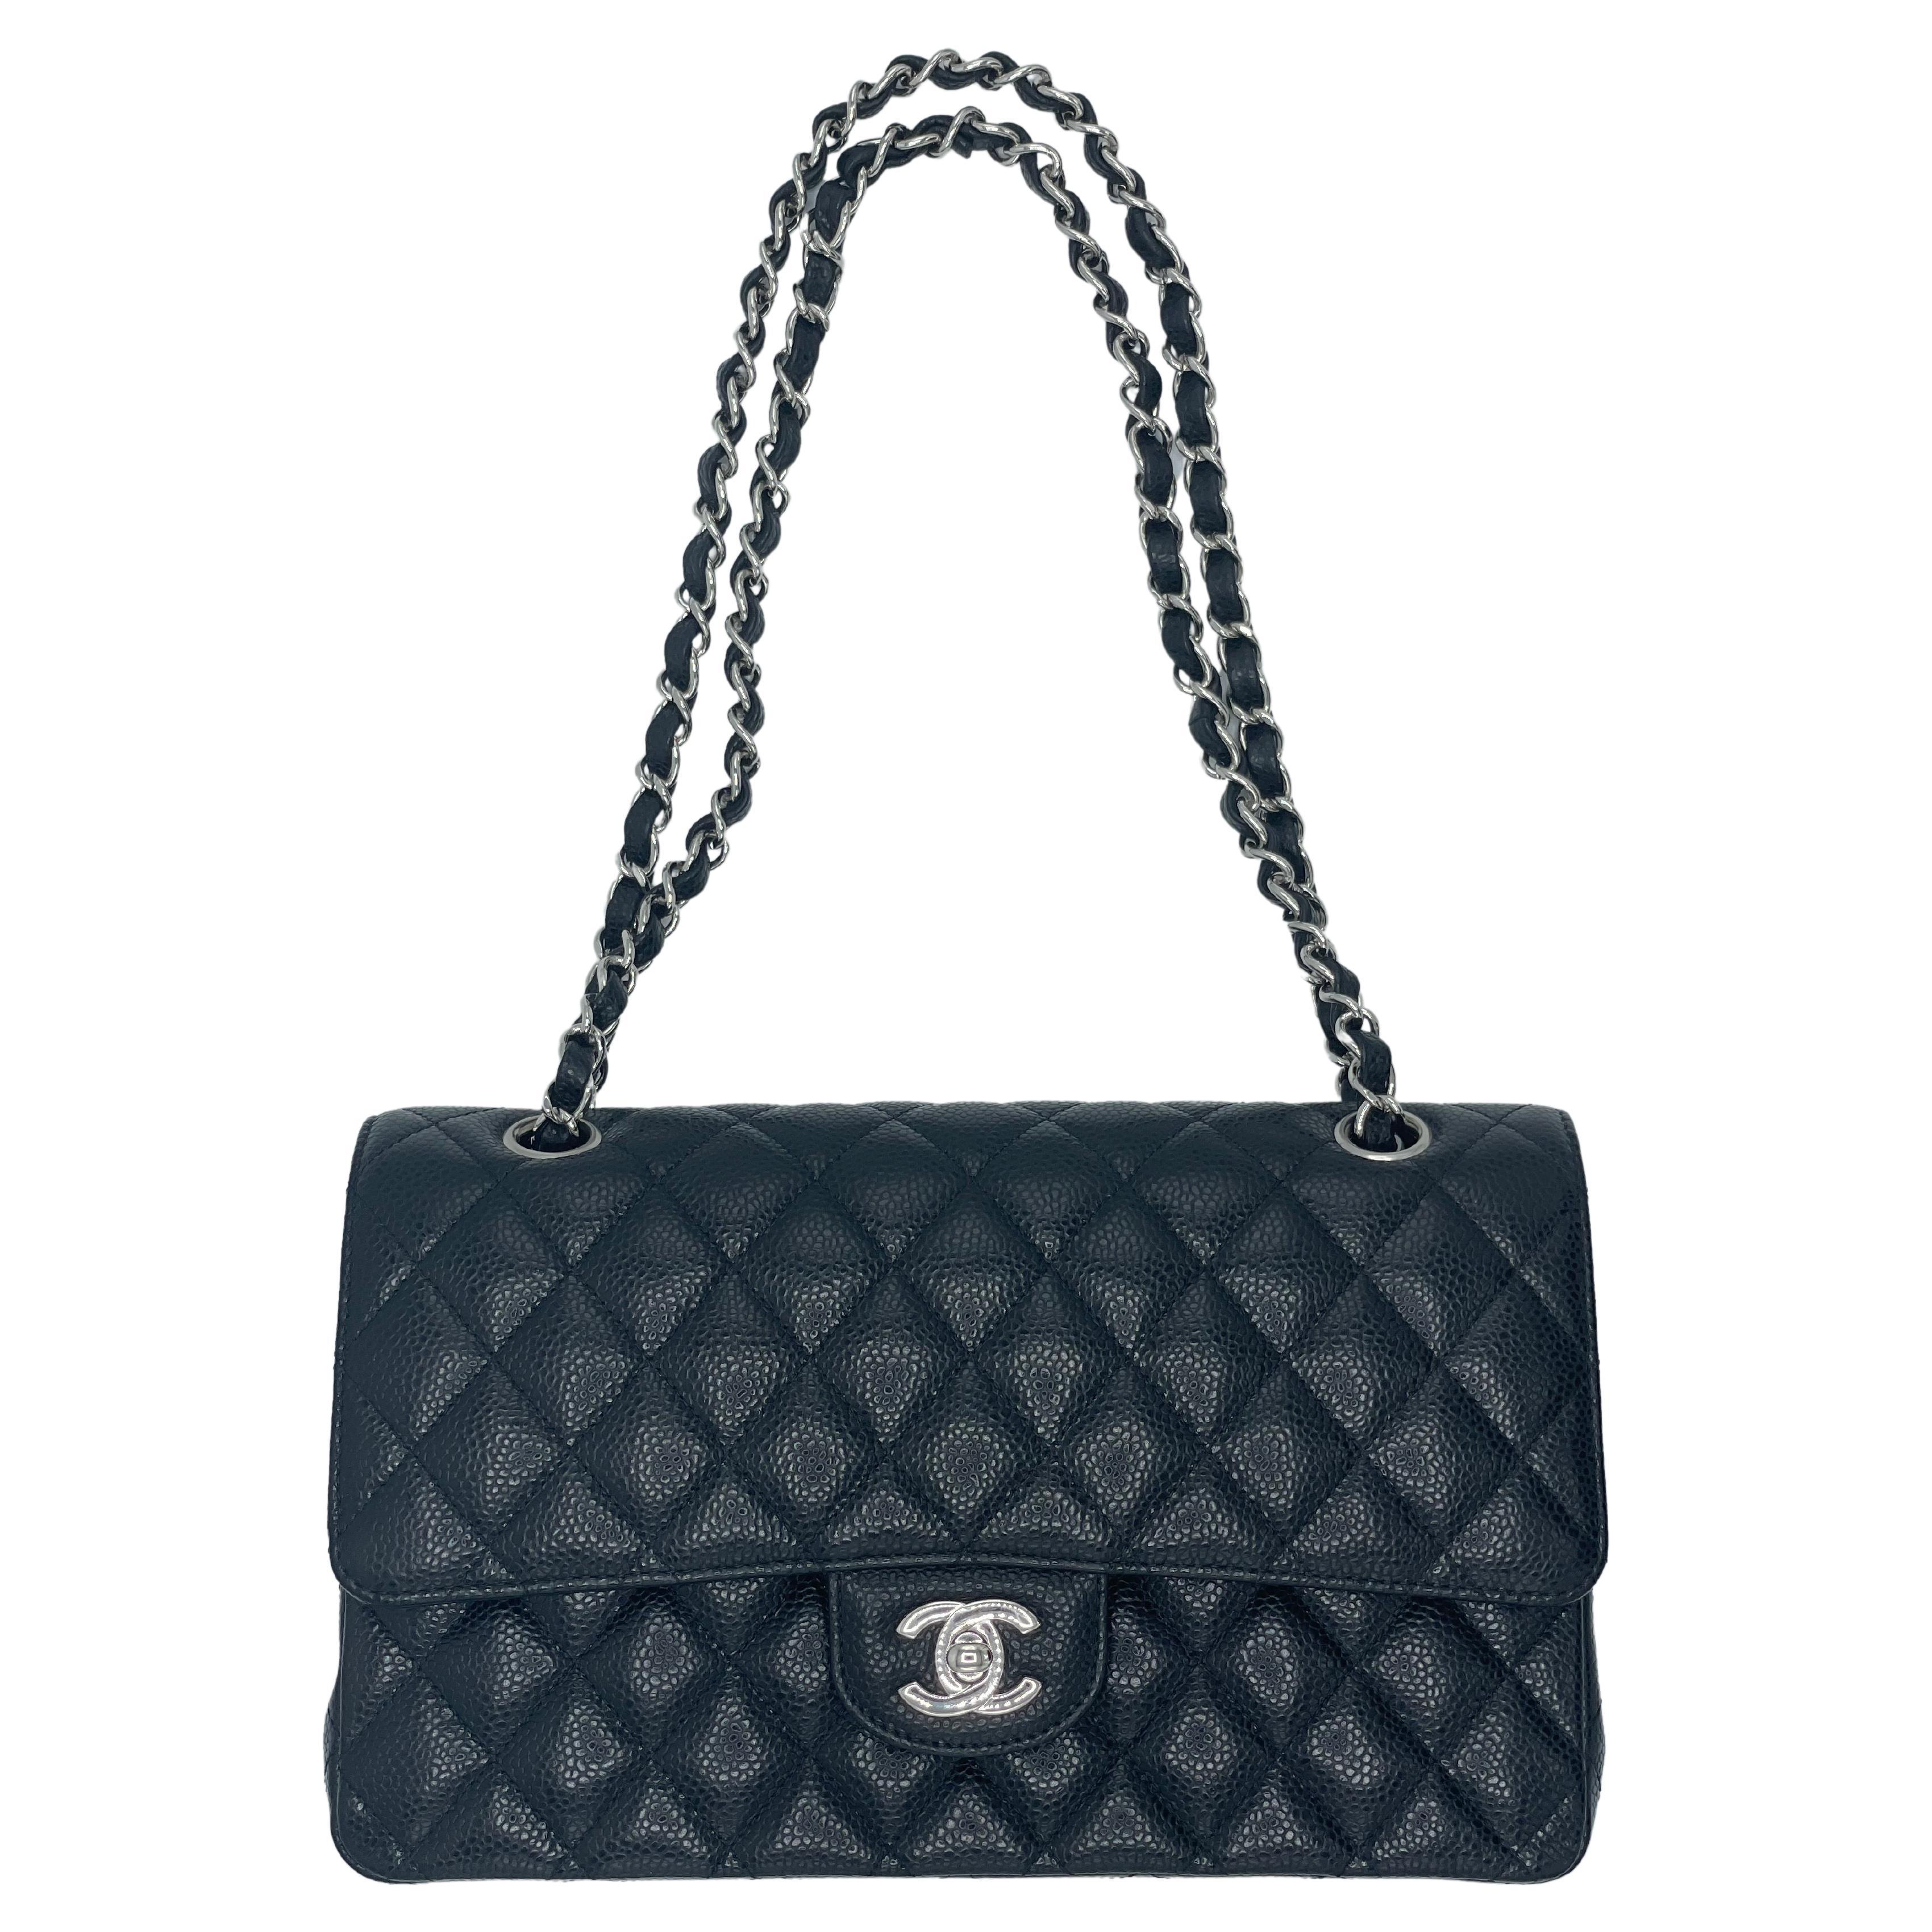  Chanel Classic Double Flap Black Silver Caviar Leather